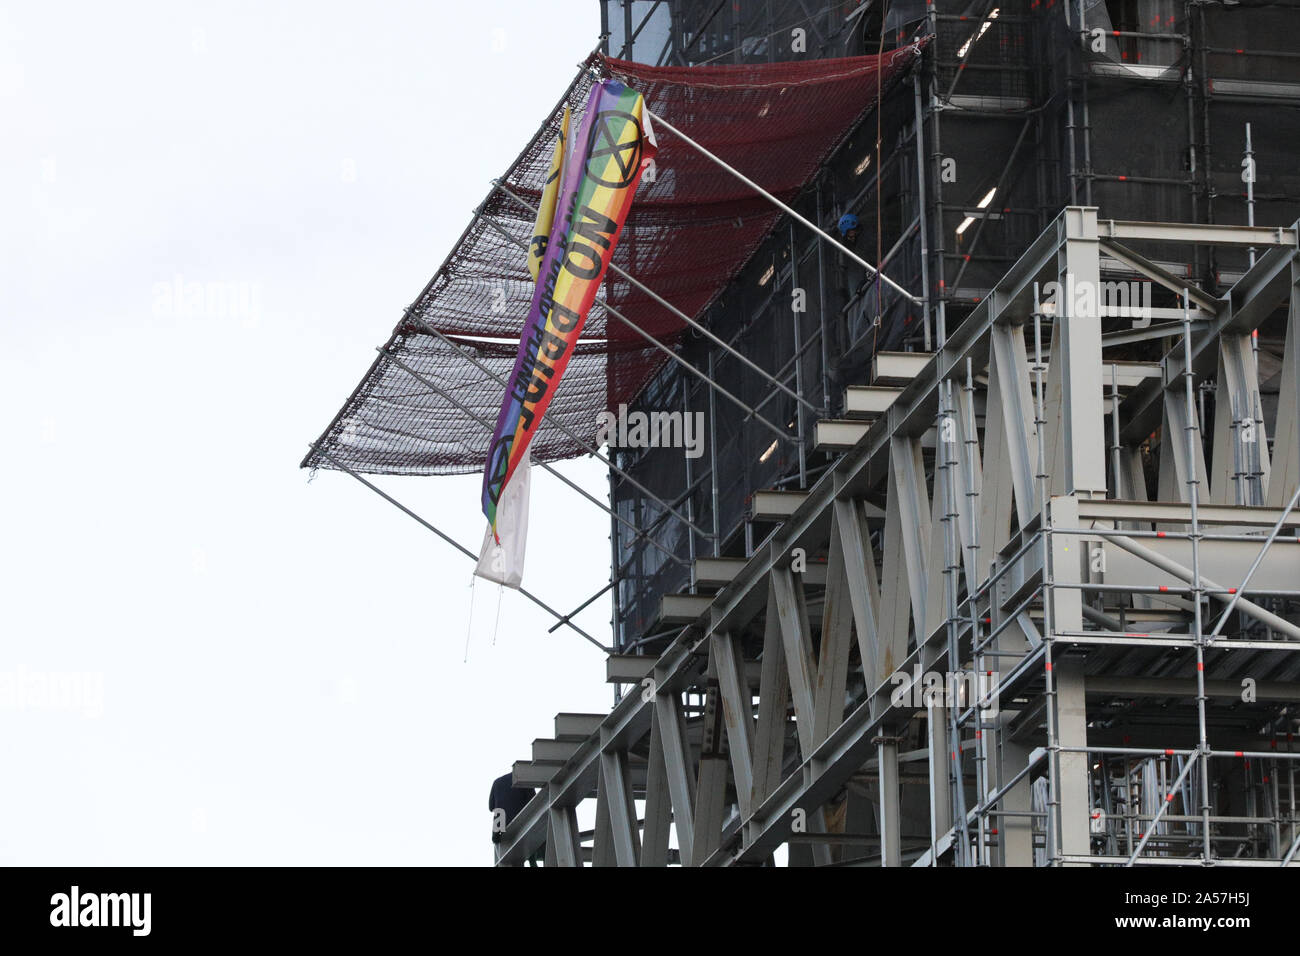 Westminster, London, UK, 18 Oct 2019. A climate protester from Extinction Rebellion (XR) has climbed up Big Ben half way, fitted two banners and sits atop some scaffolding on the southeatern corner of the Elizabeth Tower, commonly known as Big Ben, of the Houses of Parliament. Police negotiators appear to be at the scene just above him. Credit: Imageplotter/Alamy Live News Stock Photo